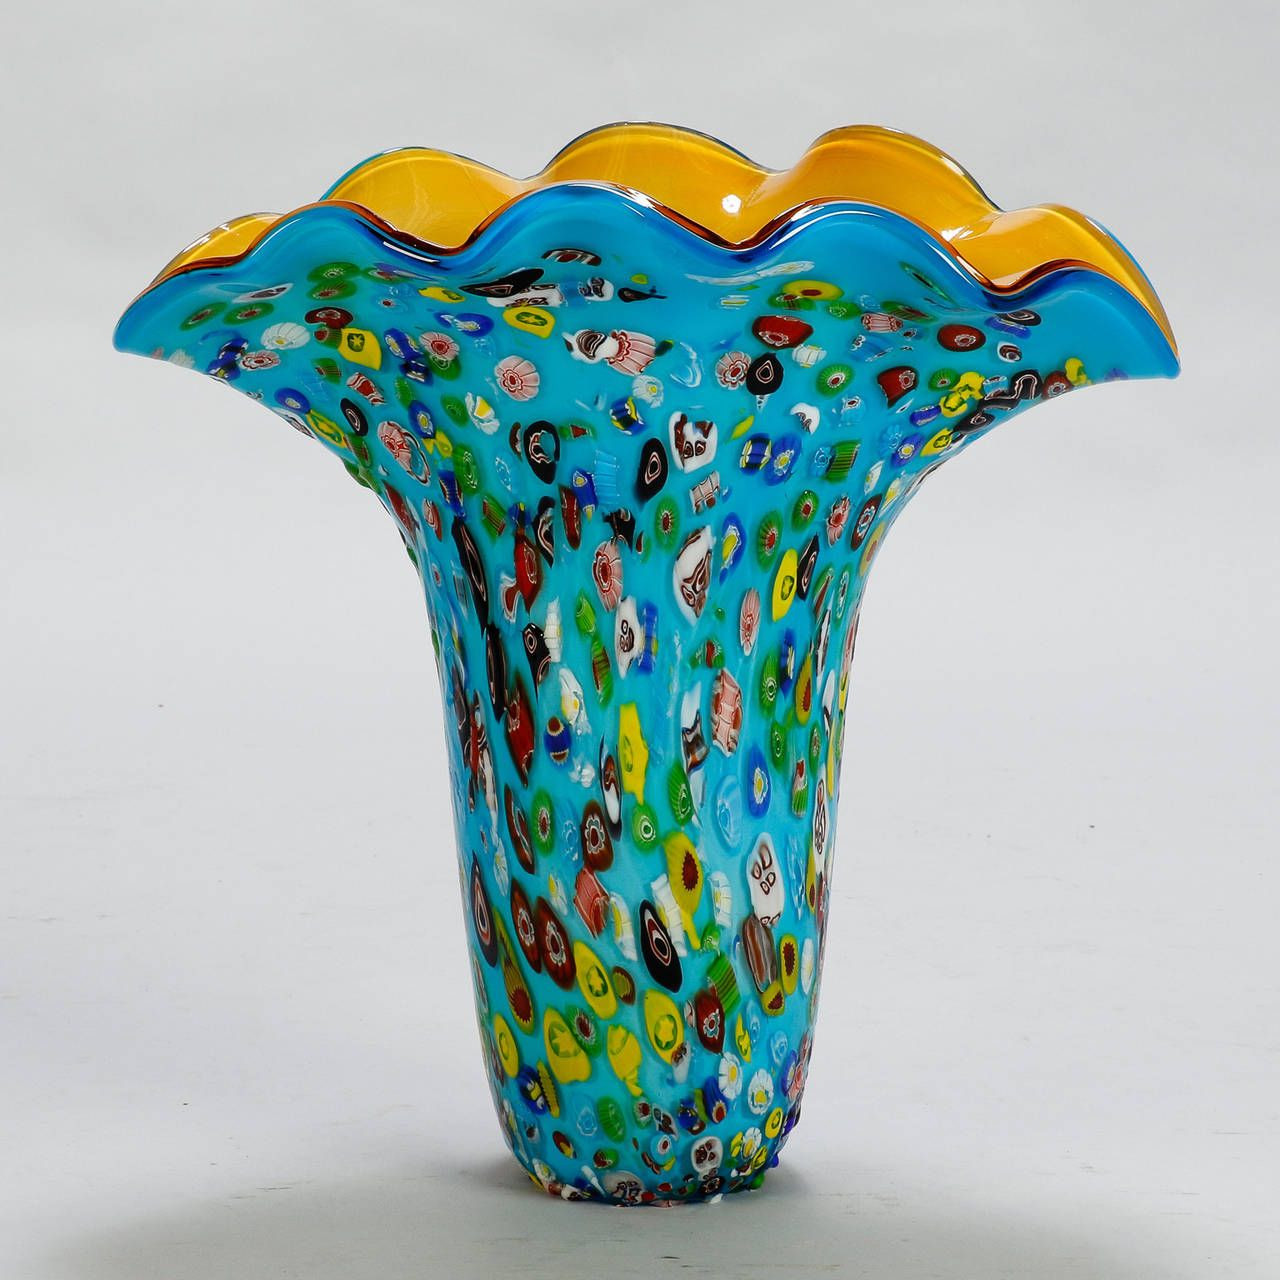 22 attractive Murano Vases for Sale 2024 free download murano vases for sale of tall blue murano glass millefiori vase murano glass pinterest intended for tall blue murano glass millefiori vase at 1stdibs